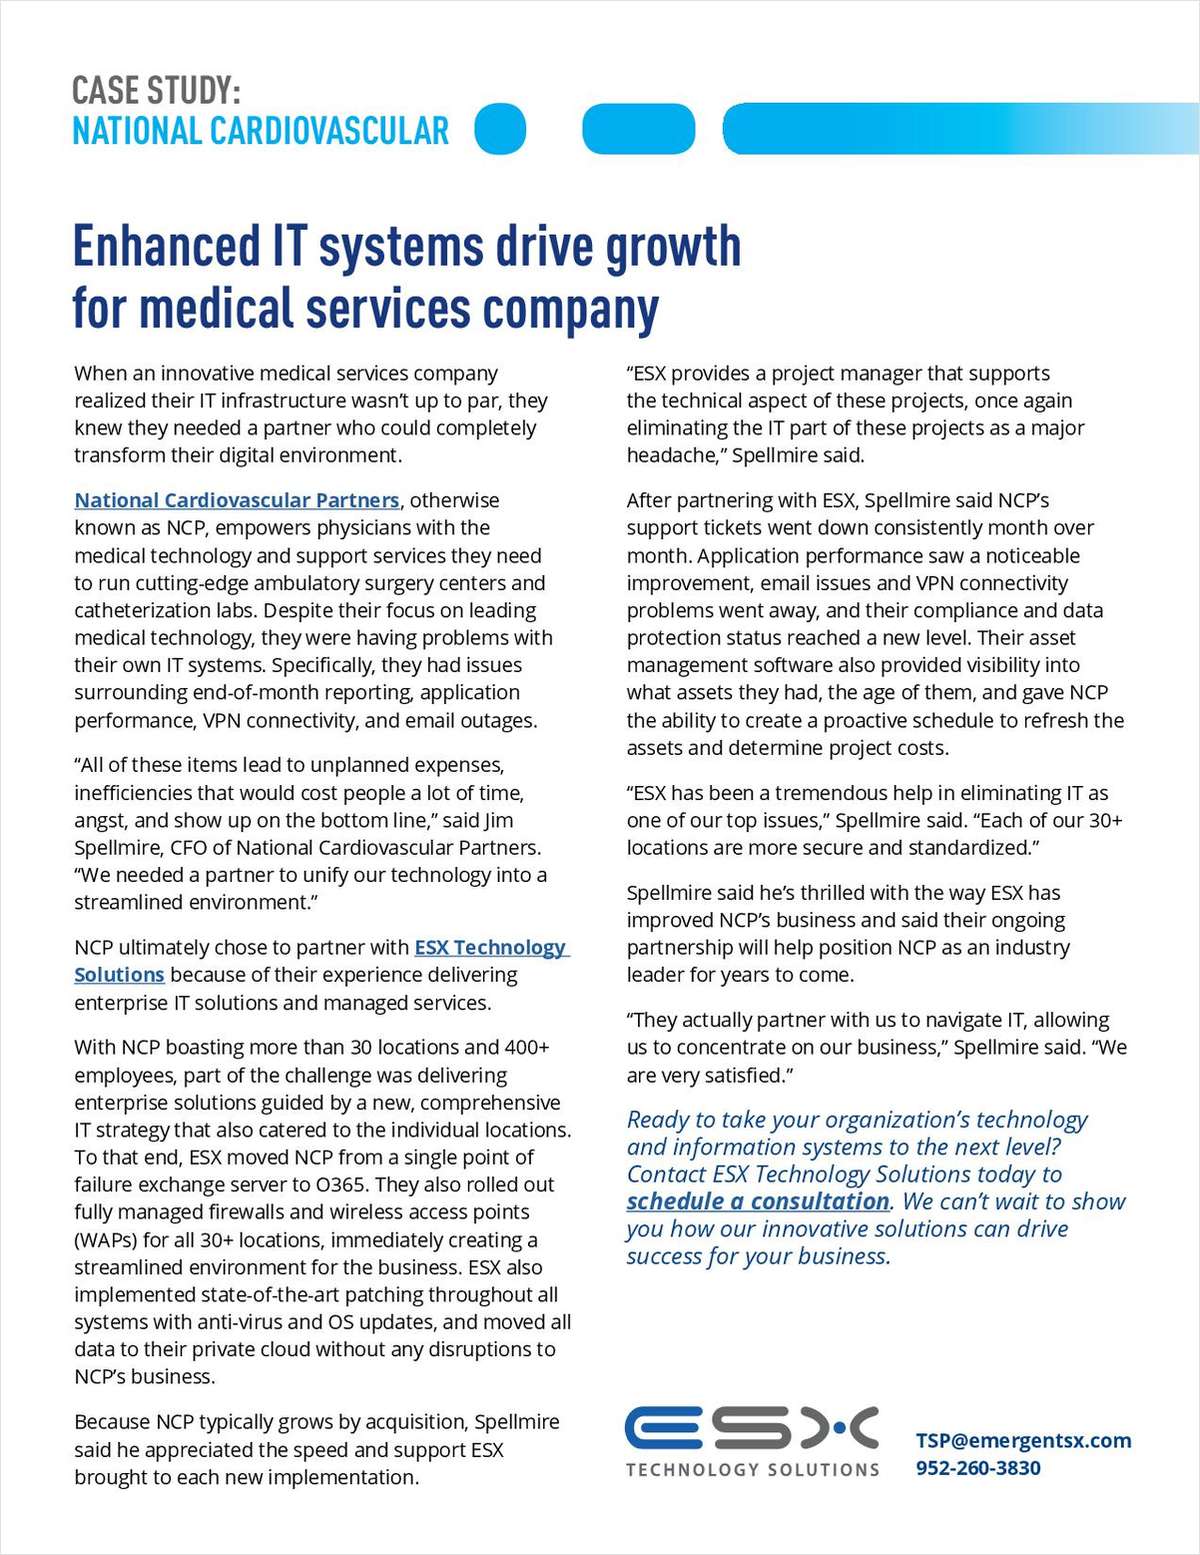 Enhanced IT Systems Drive Growth for Medical Services Company